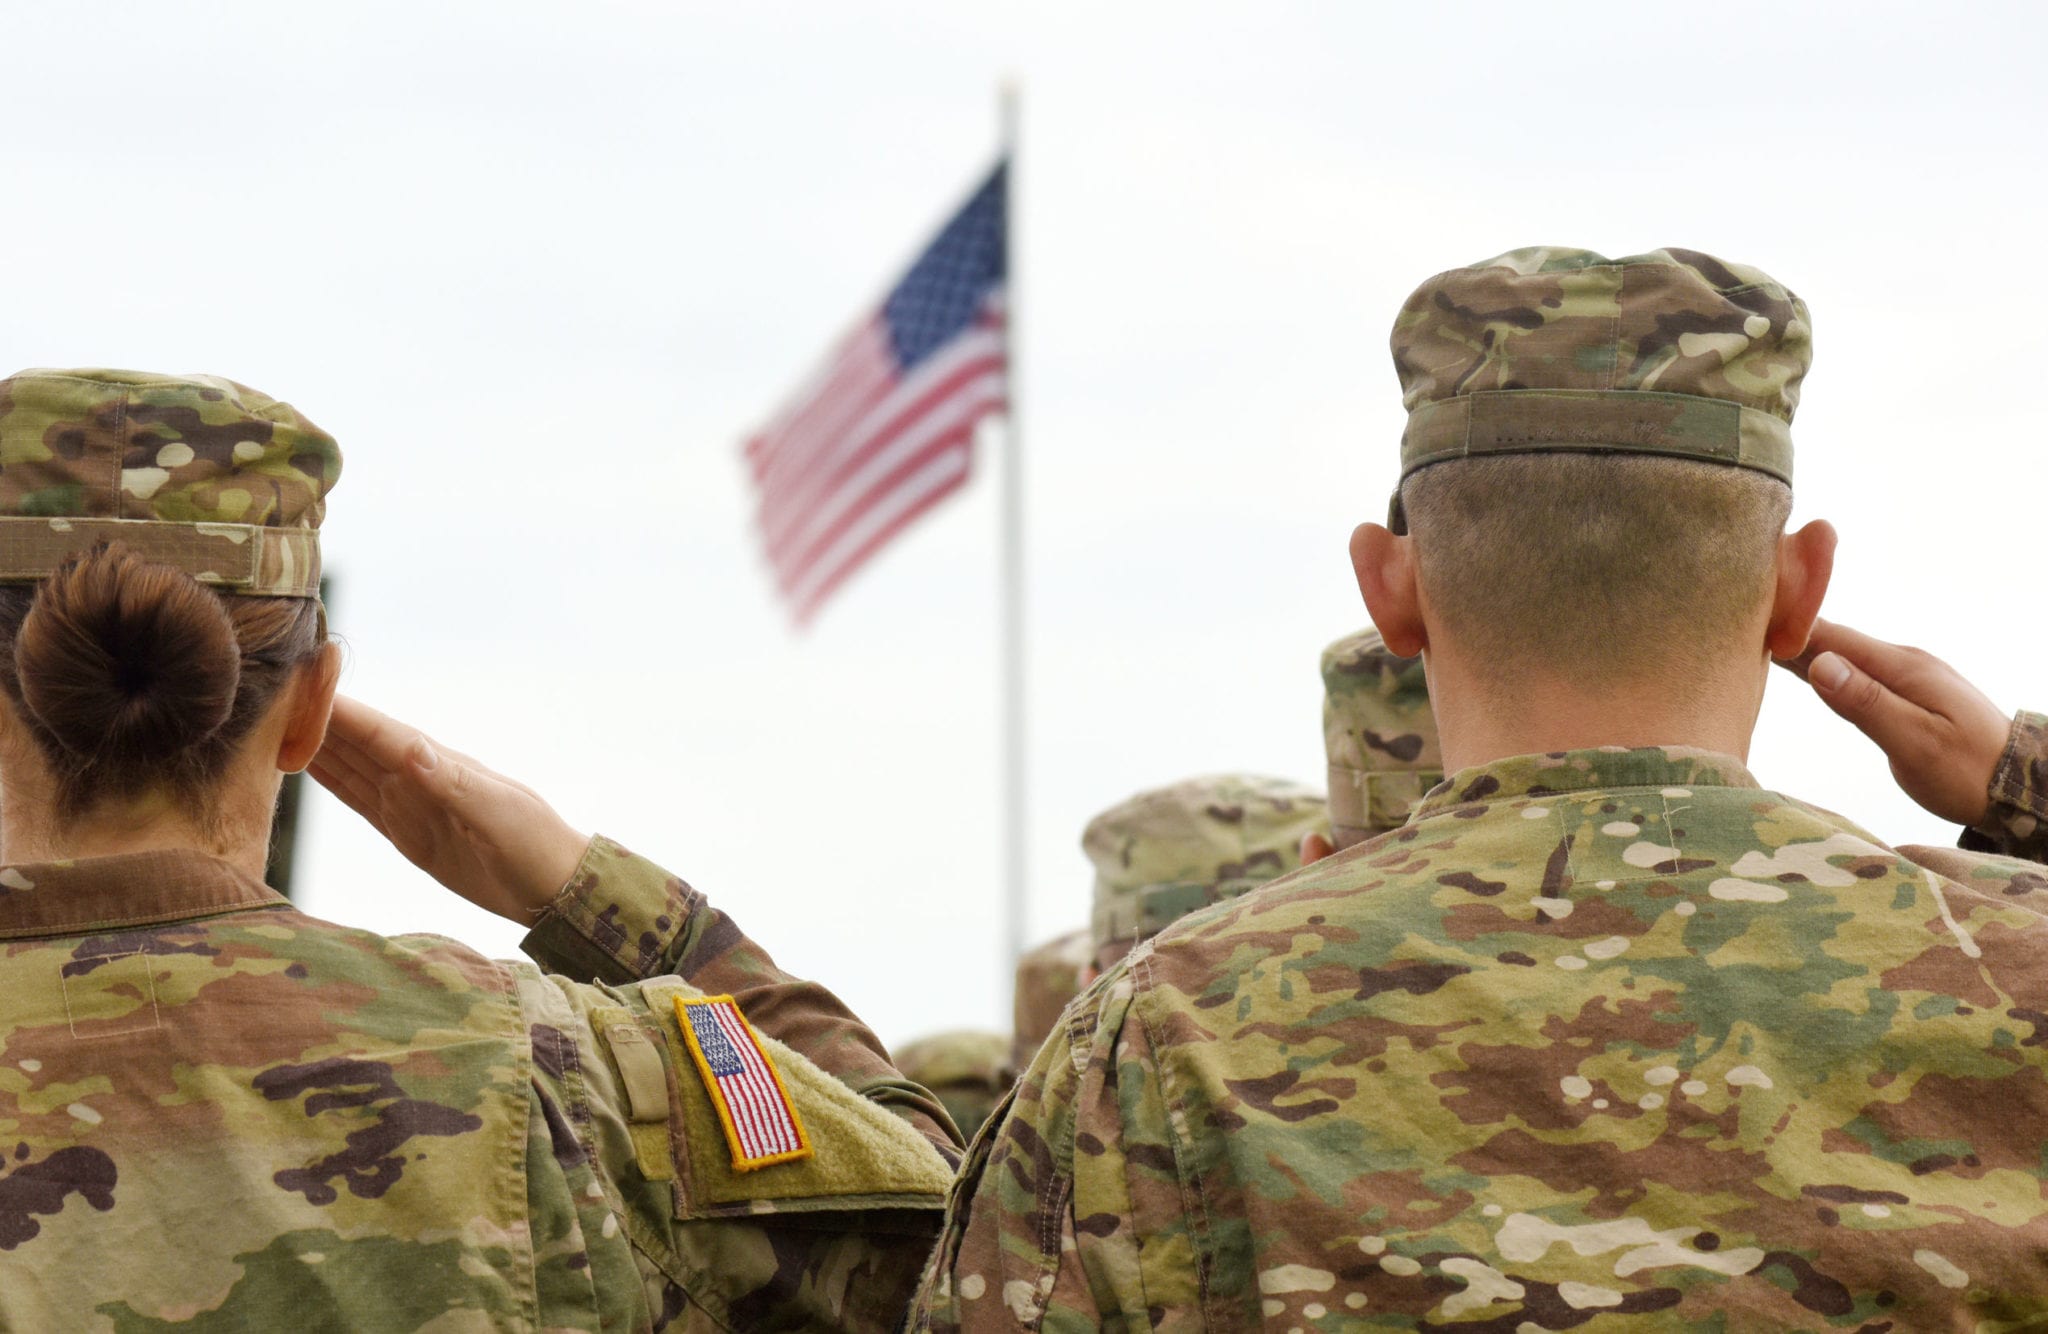 A Minnesota Military Defense Attorney Can Help You with Conscientious Objection